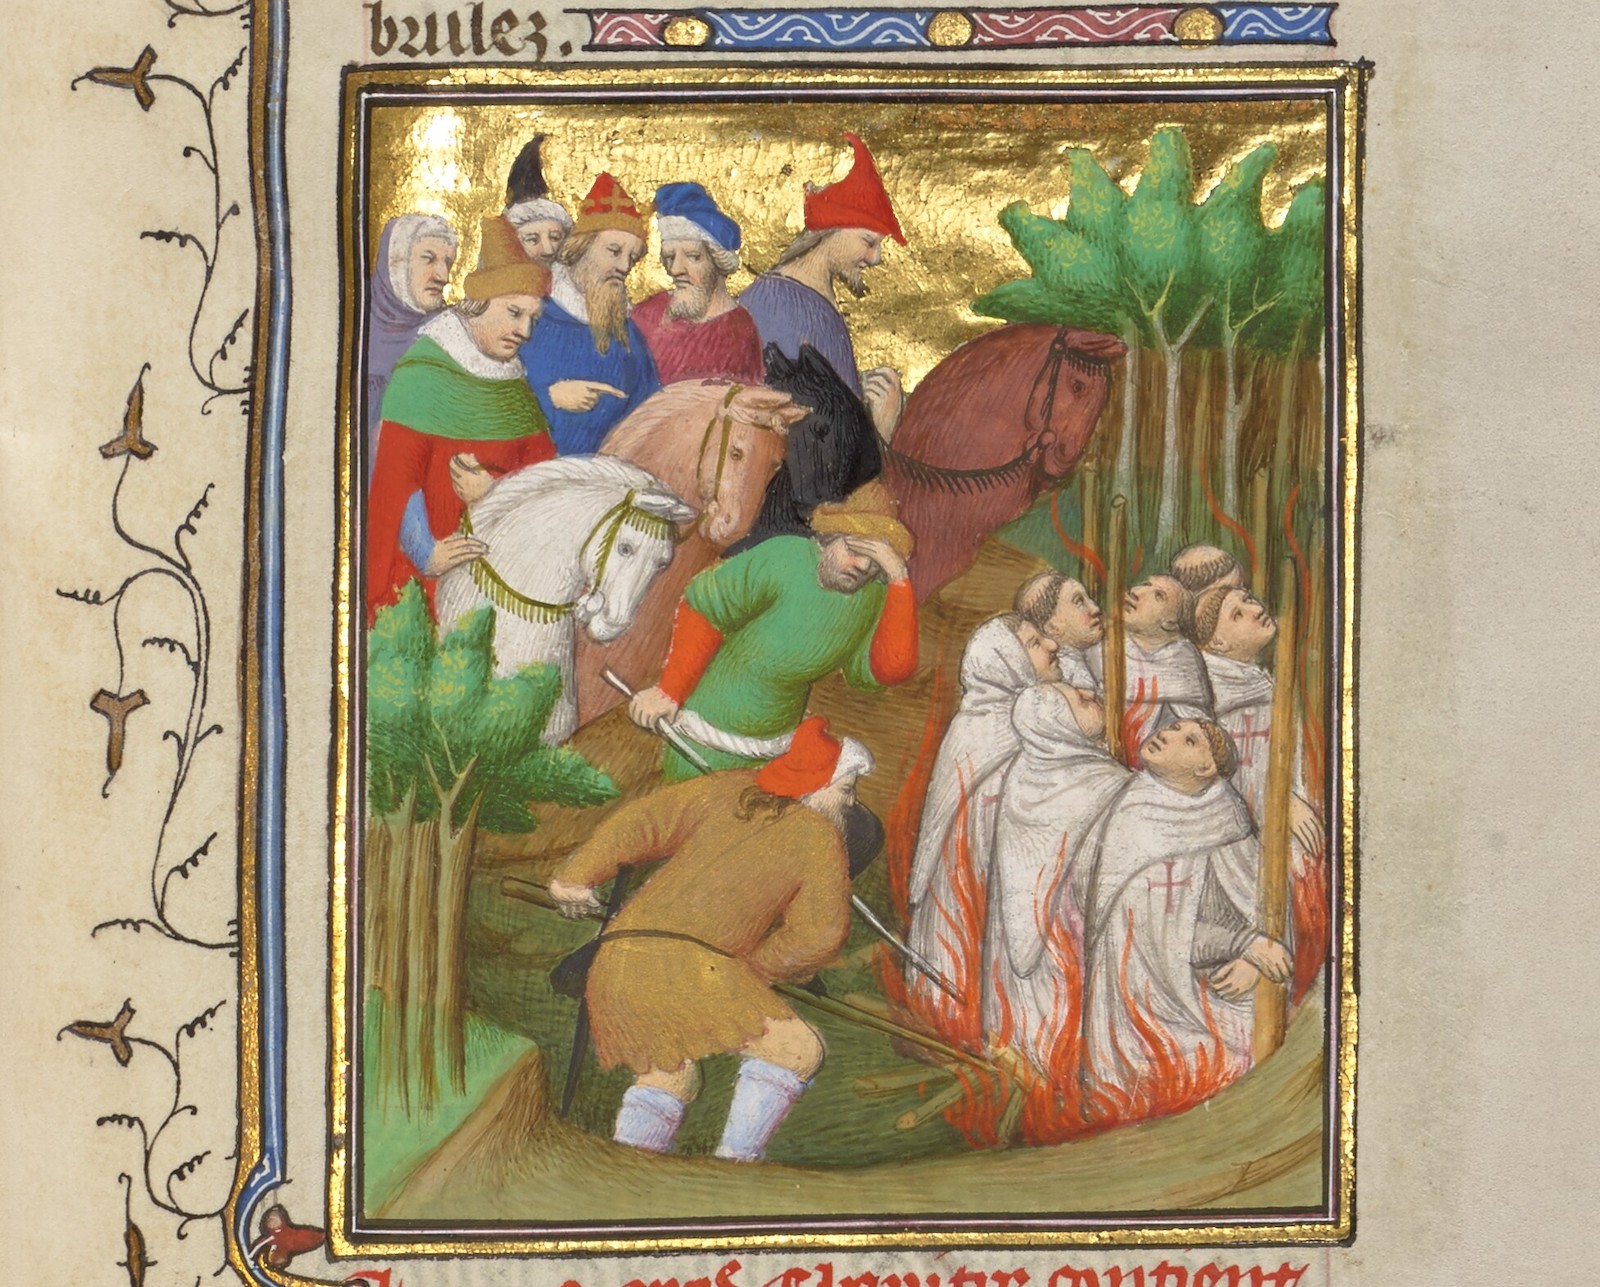 The Knights Templar burned by order of King Philip IV of France from an illustrated manuscript, c. 1413-15. The J. Paul Getty Museum, Los Angeles. Public Domain.